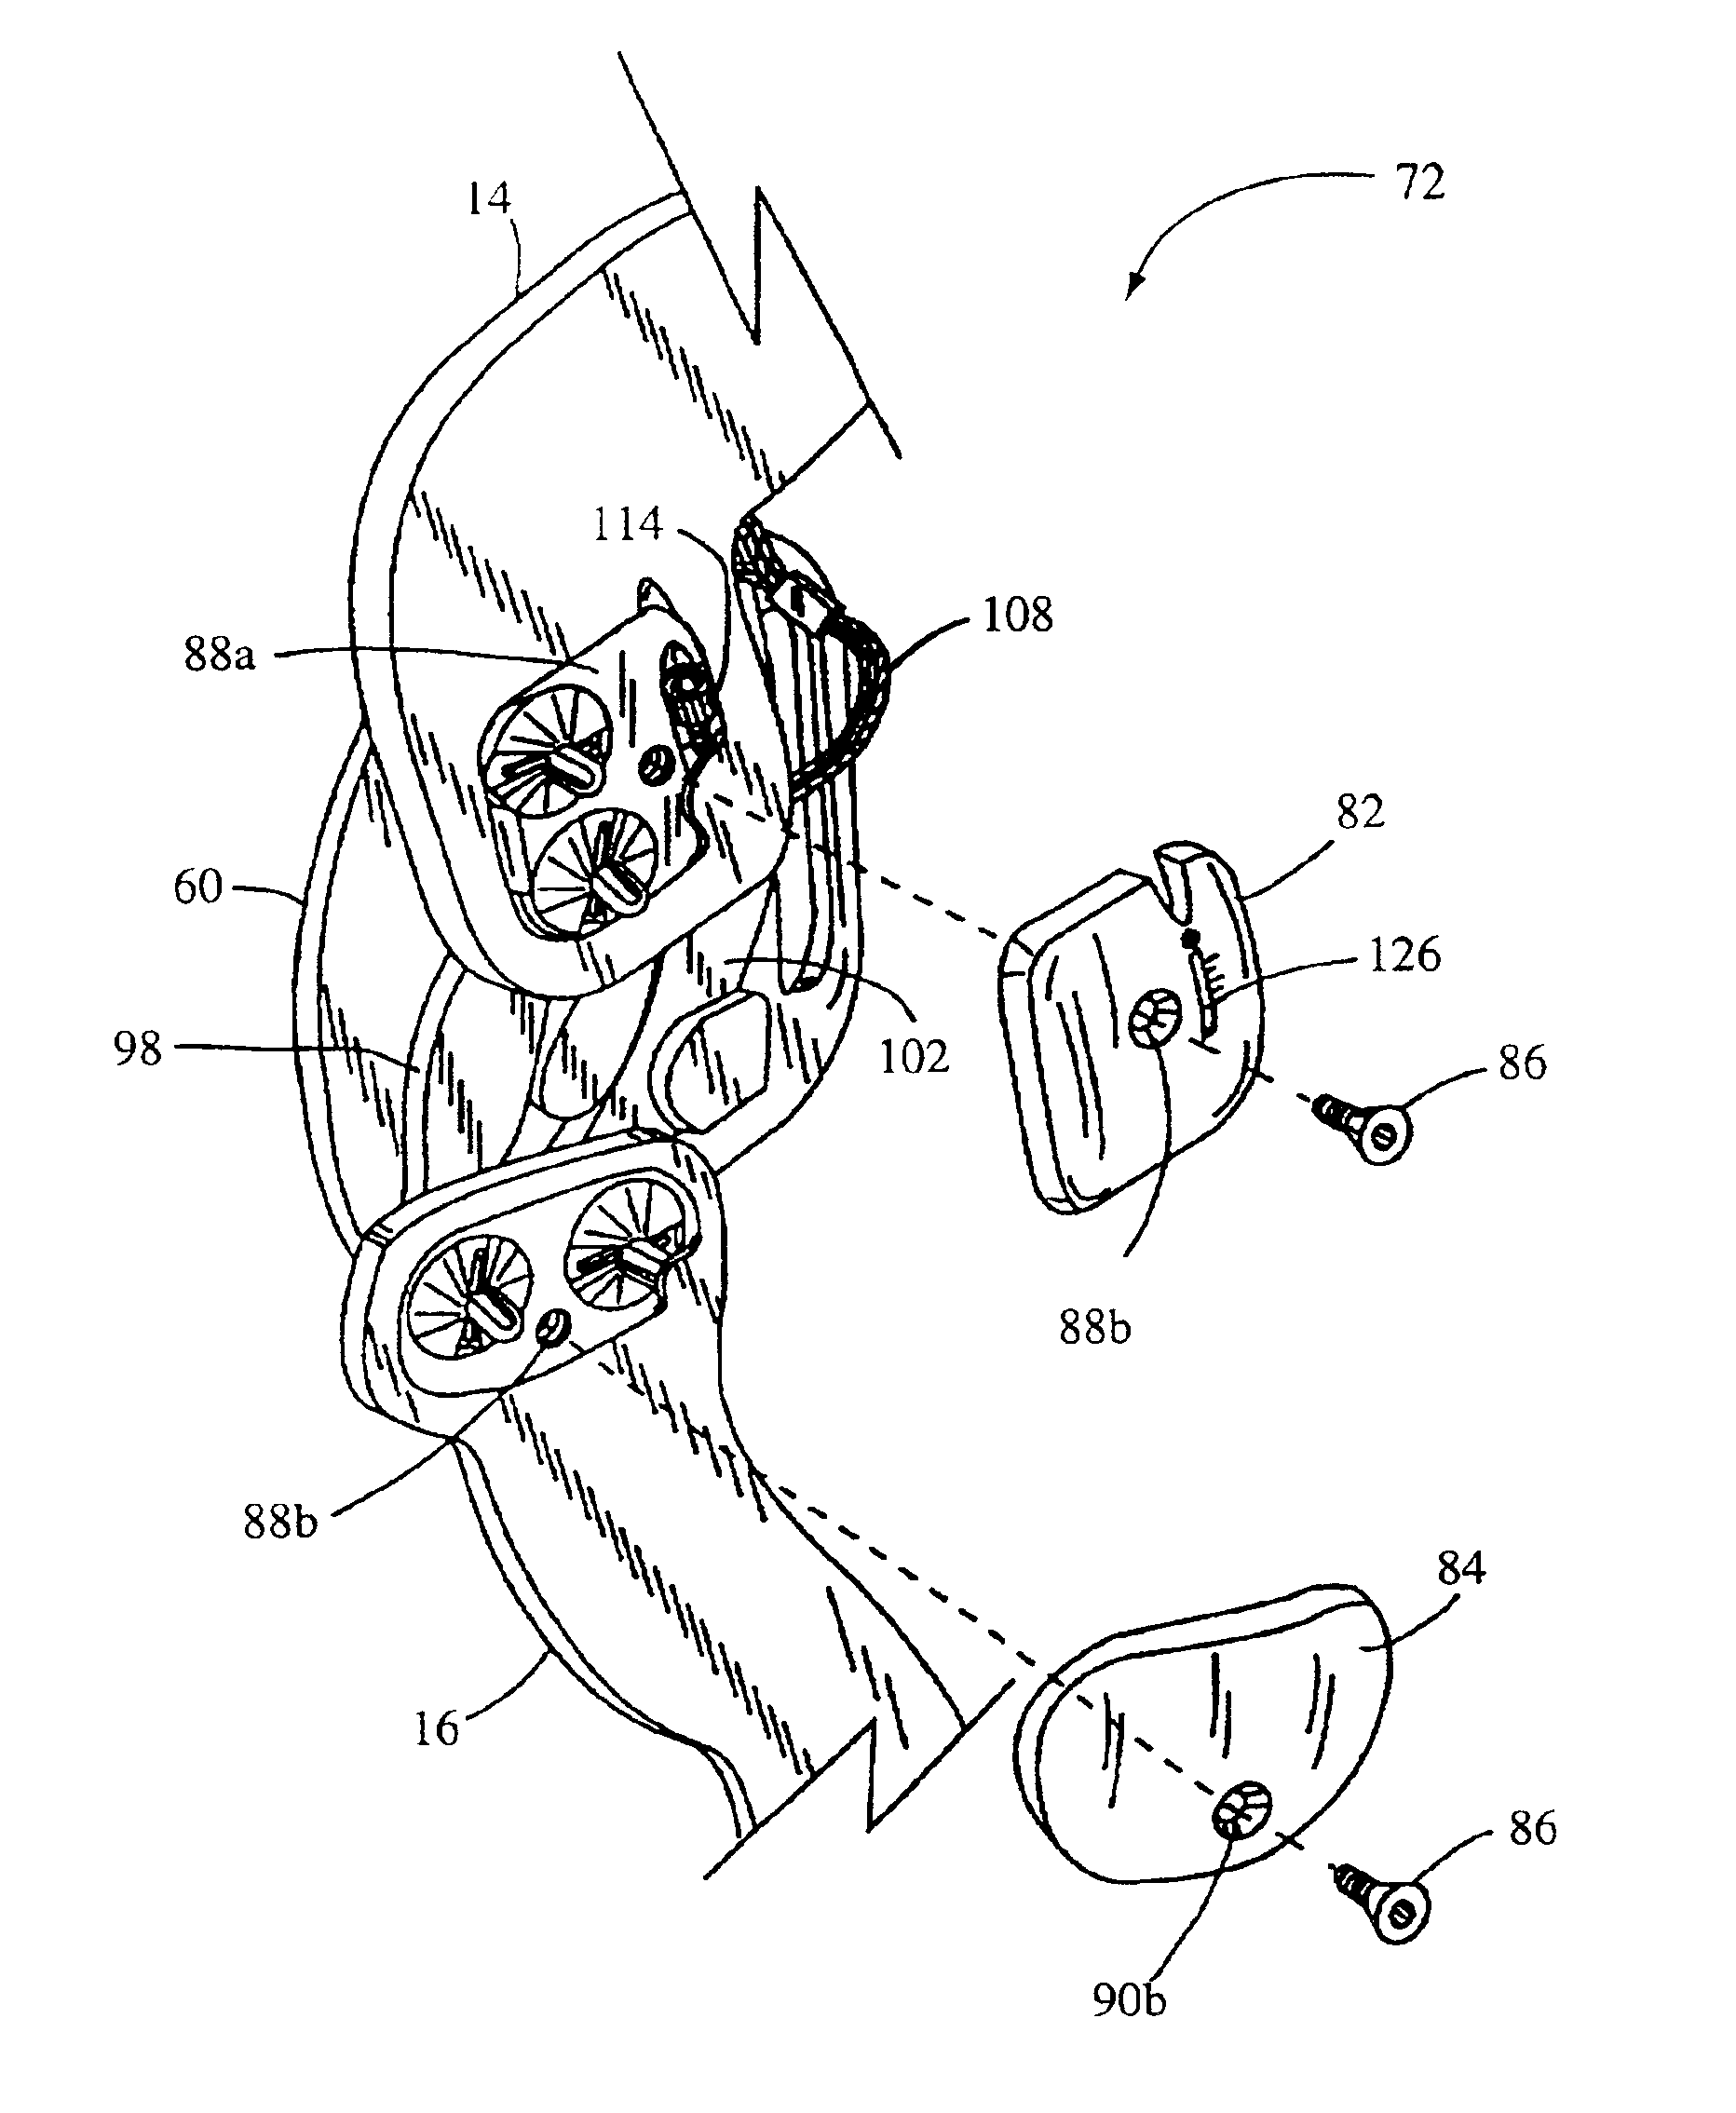 Joint brace with multi-planar pivoting assembly and infinitely adjustable limb extension regulator